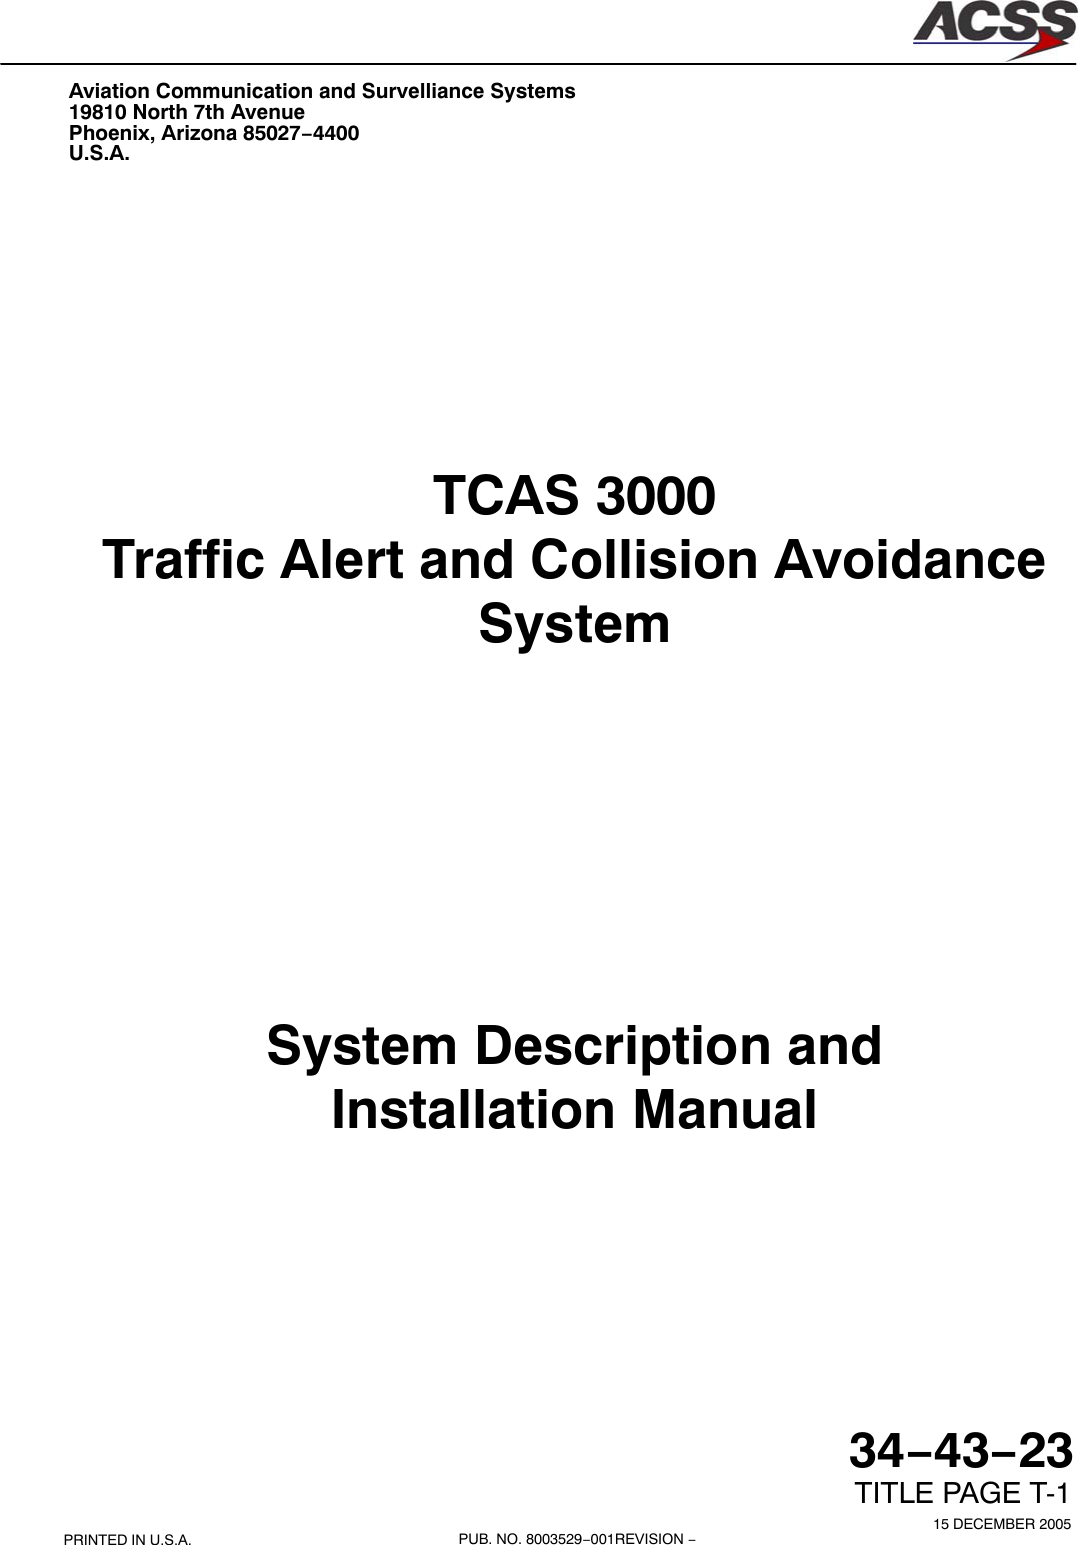 Aviation Communication and Survelliance Systems19810 North 7th AvenuePhoenix, Arizona 85027−4400U.S.A.15 DECEMBER 200534−43−23TITLE PAGE T-1PRINTED IN U.S.A. PUB. NO. 8003529−001REVISION −TCAS 3000Traffic Alert and Collision AvoidanceSystemSystem Description andInstallation Manual